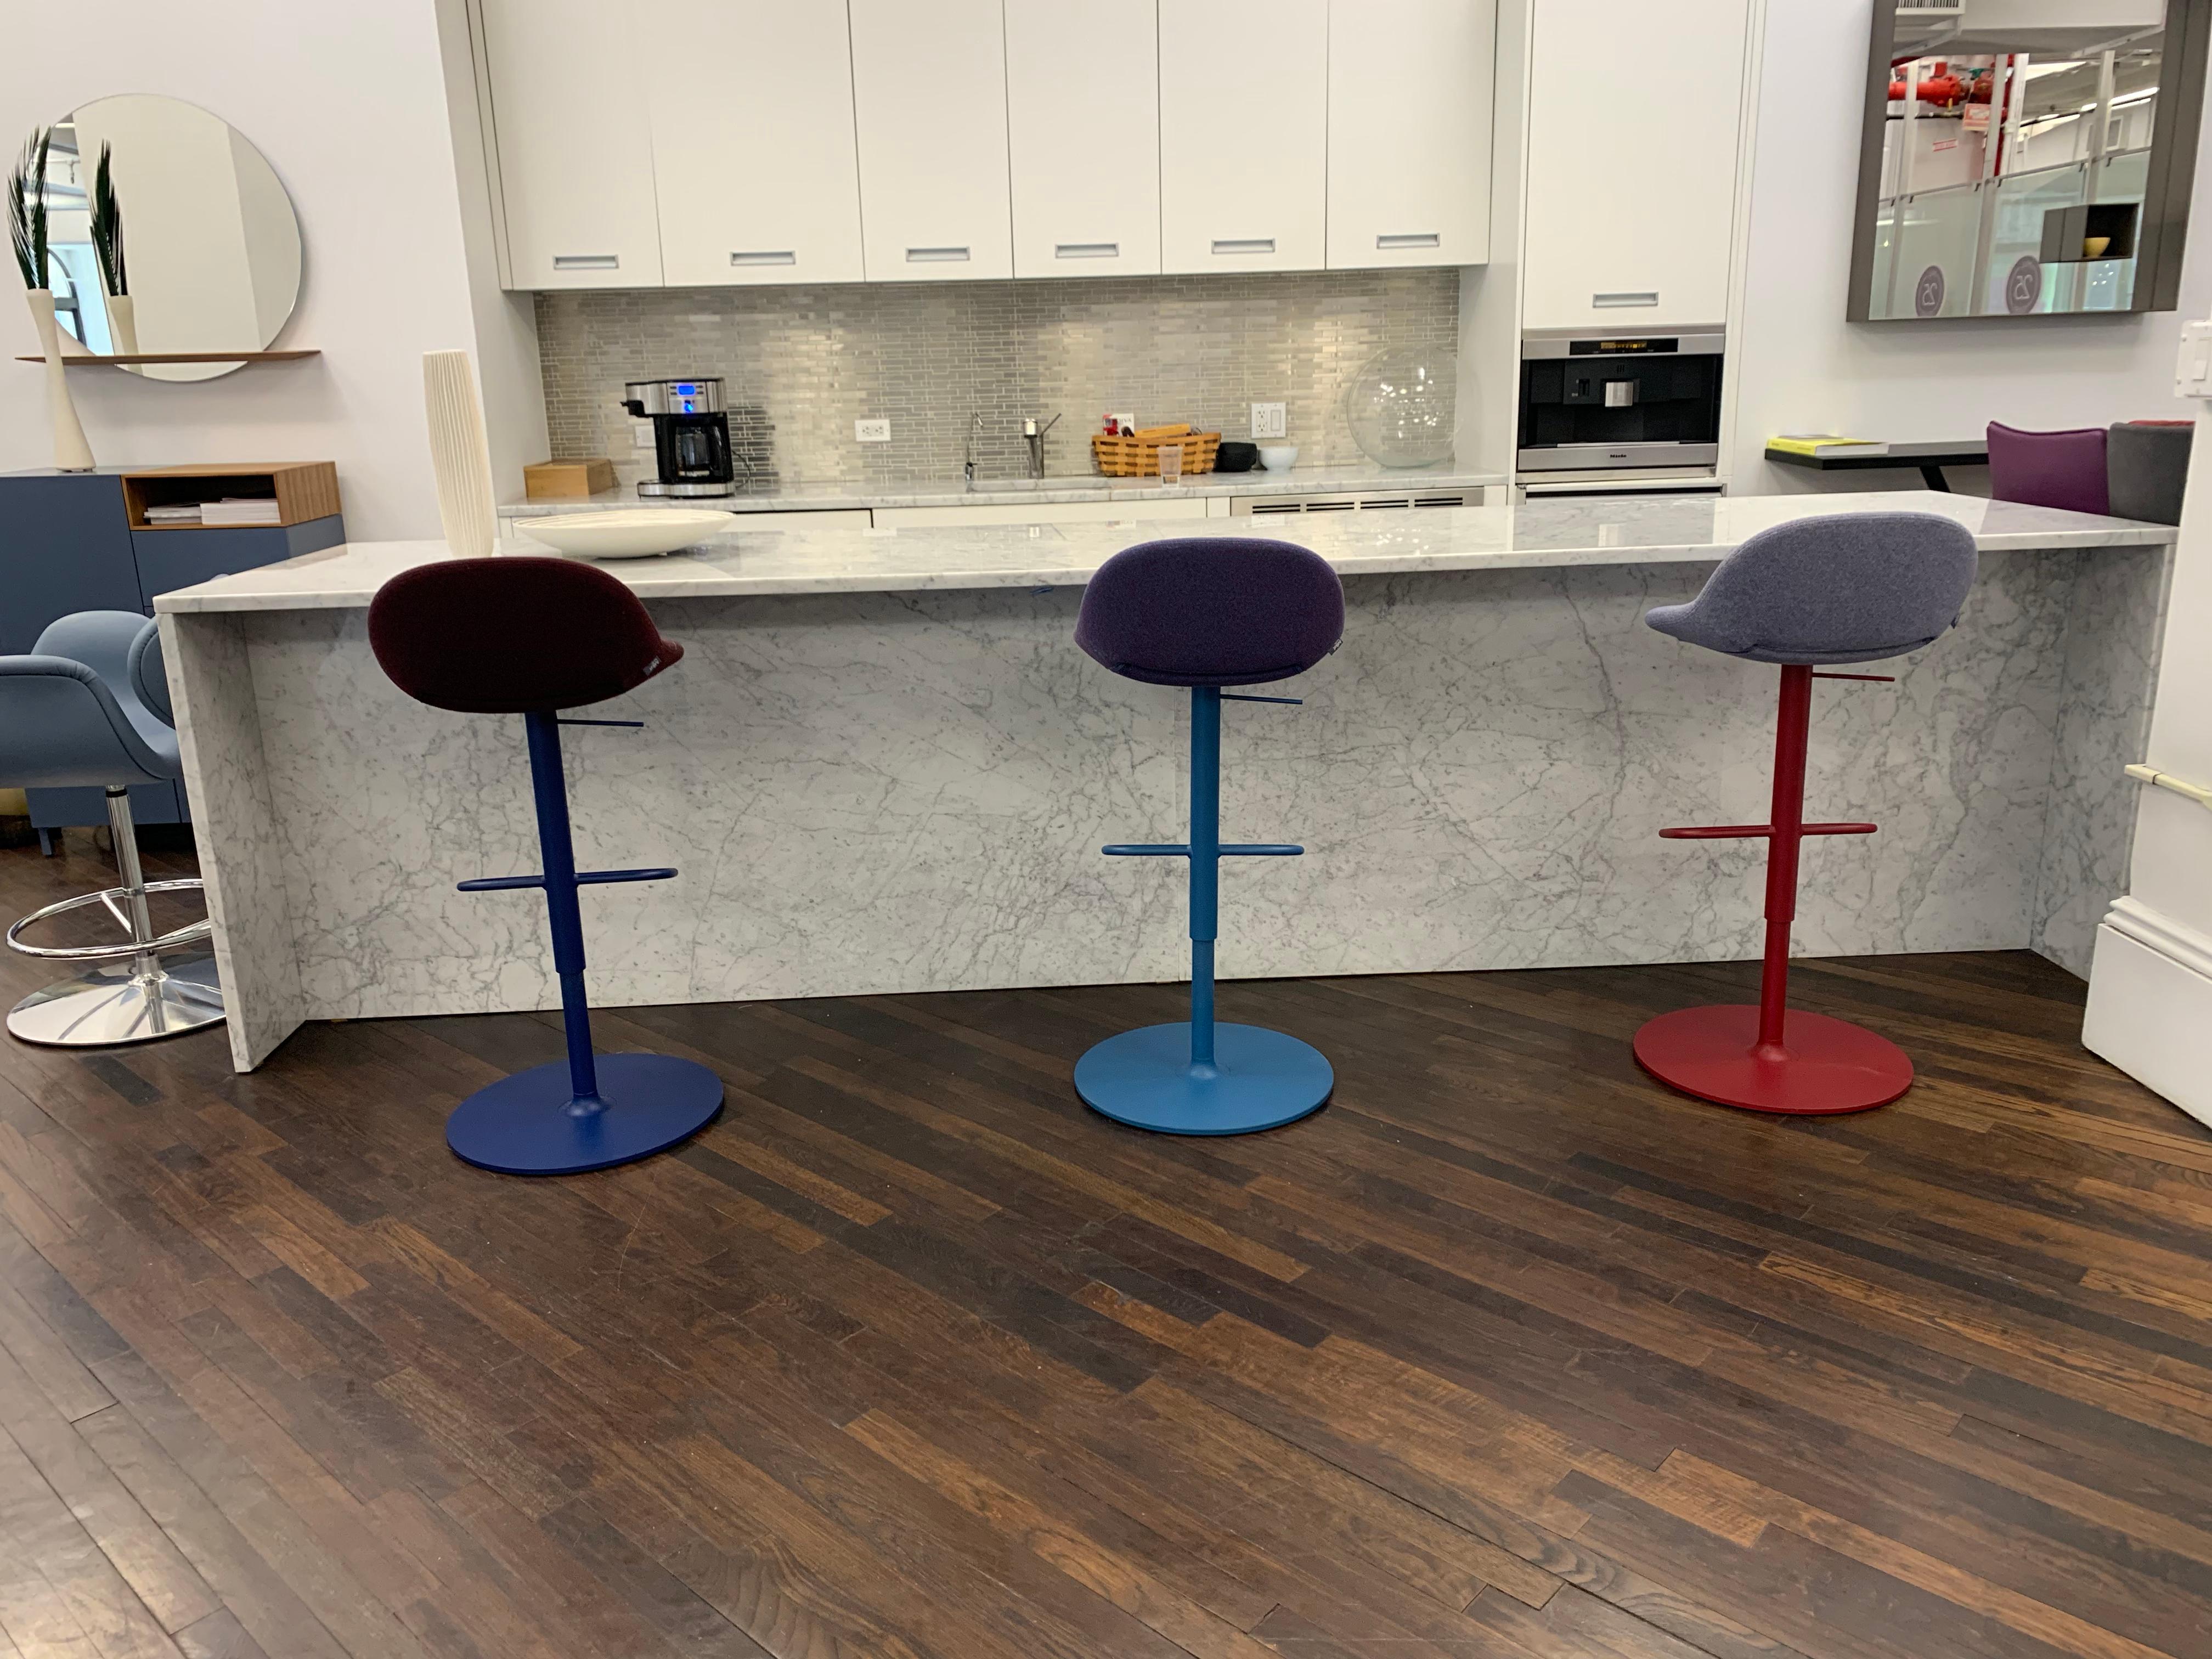 Beso bar stool 61cm-81cm height
adjustable
disc, swiveling without returnmechanism
UPH seat: selecte 680, 660 and 720
Base finish: P65, P59 and P73
Seat and back: Metal insert frame. Ø 8mm. Covered with moulded foam.
Beso, Spanish for ‘kiss’,